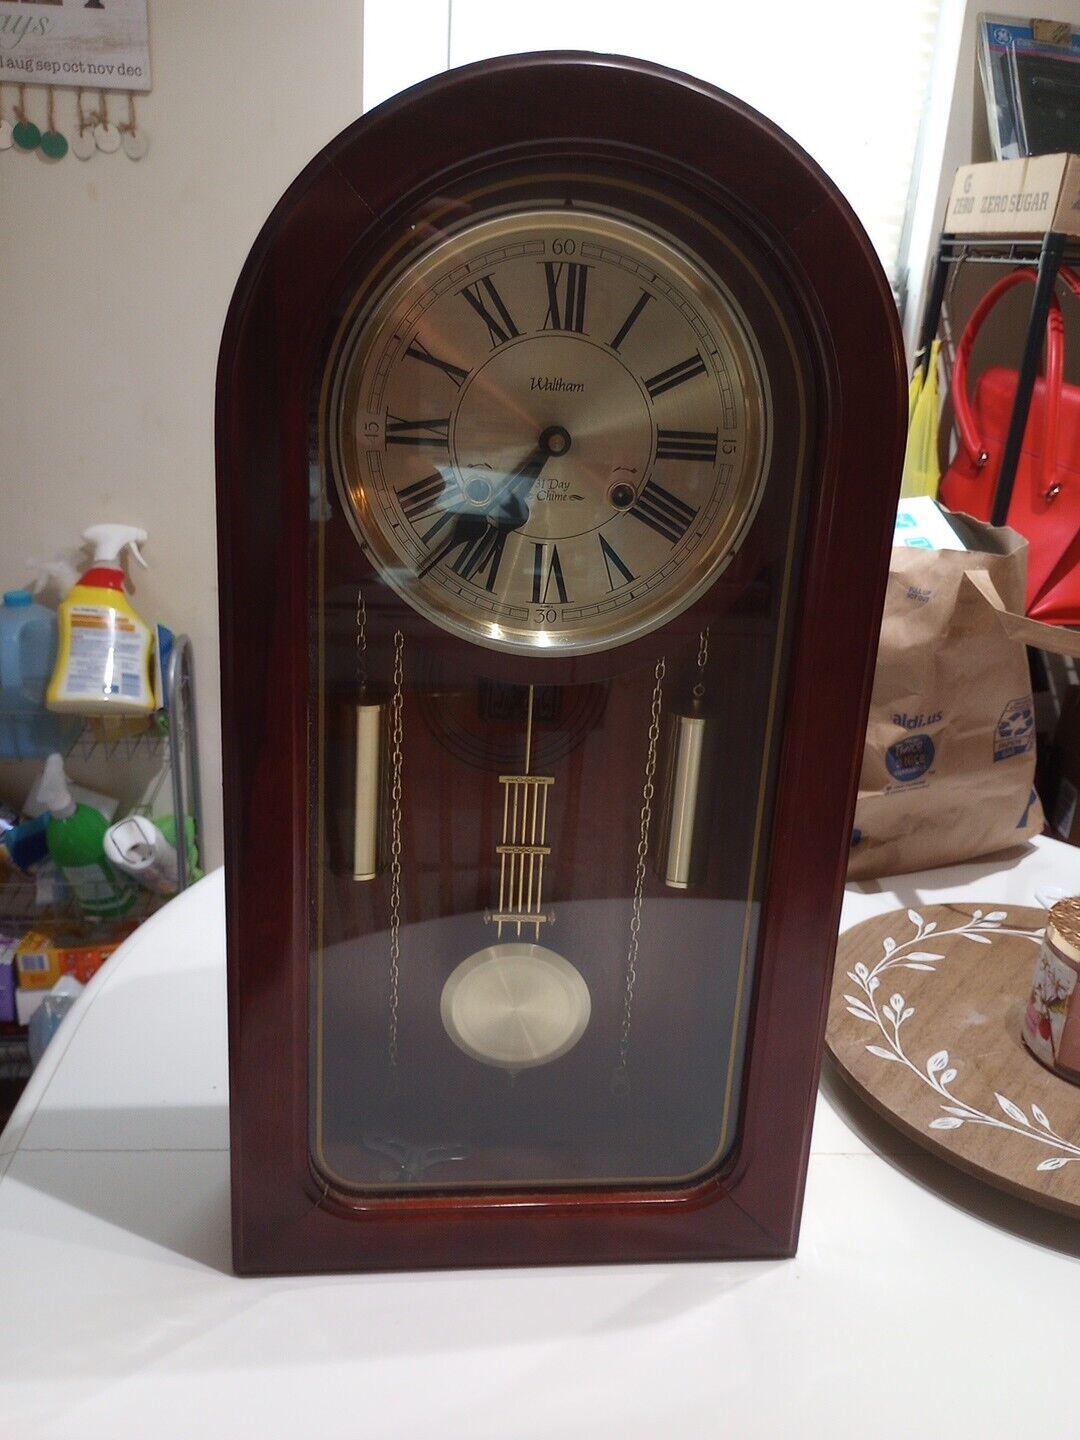 VINTAGE WALTHAM 31 DAY WINDING WALL CLOCK WITH CHIMES, MADE IN KOREA. PleaseRead